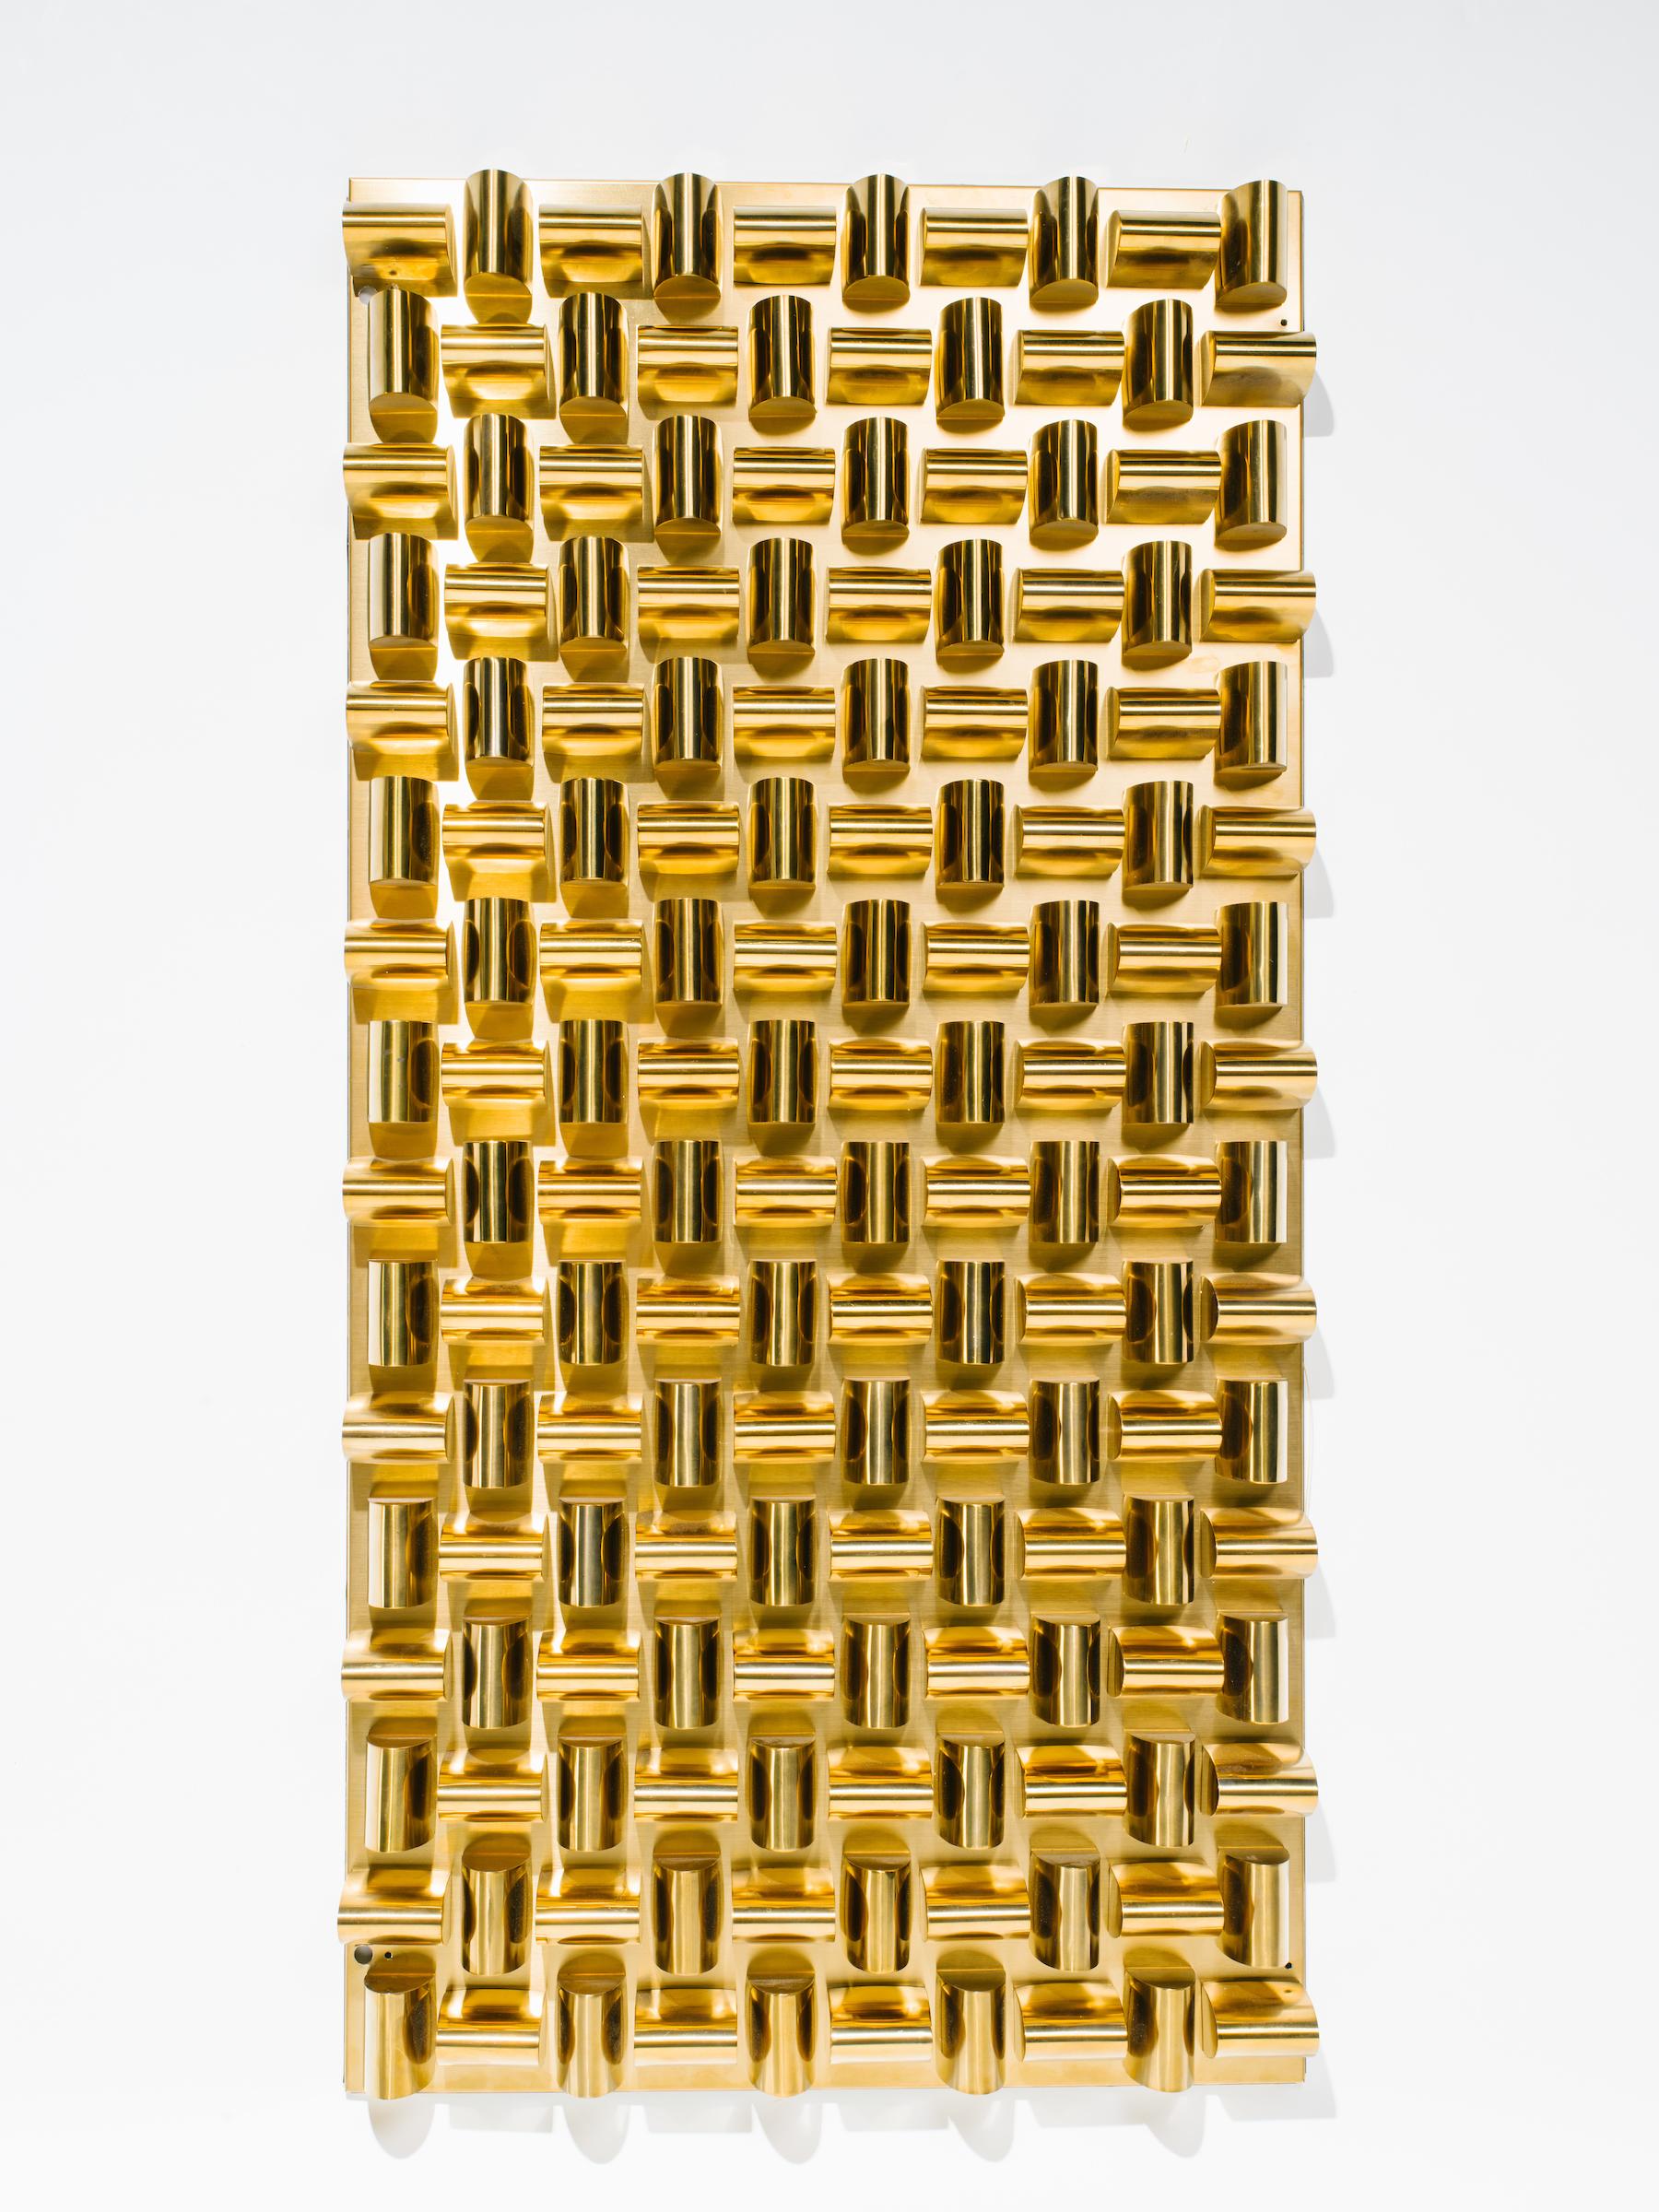 Stunning pair of modernist wall sculptures in brass metal with faceted design. Wall panels consists of raised rounded triangles alternating vertically and horizontally, creating a woven pattern. The panels can be hung vertically or landscape. Fitted